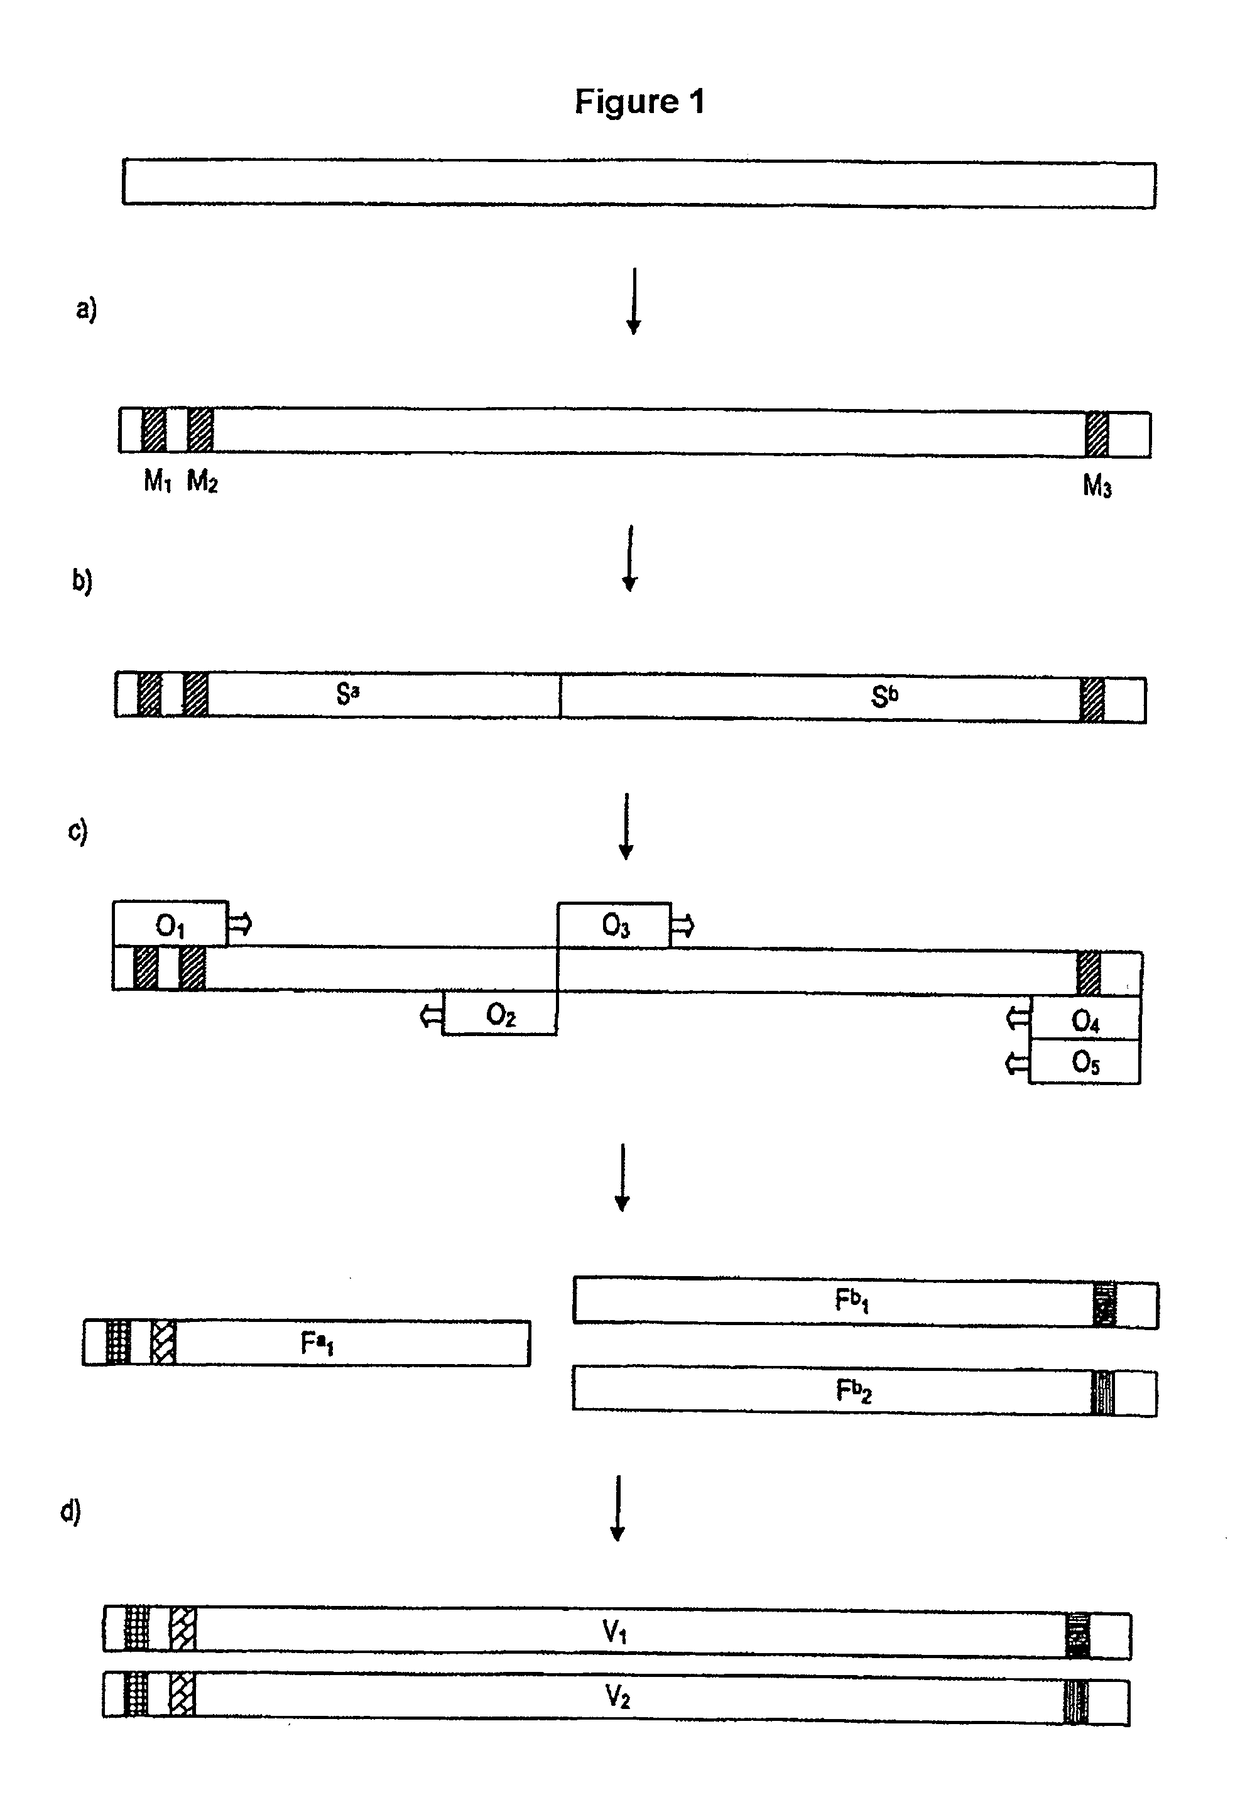 Process for generating a variant library of DNA sequences